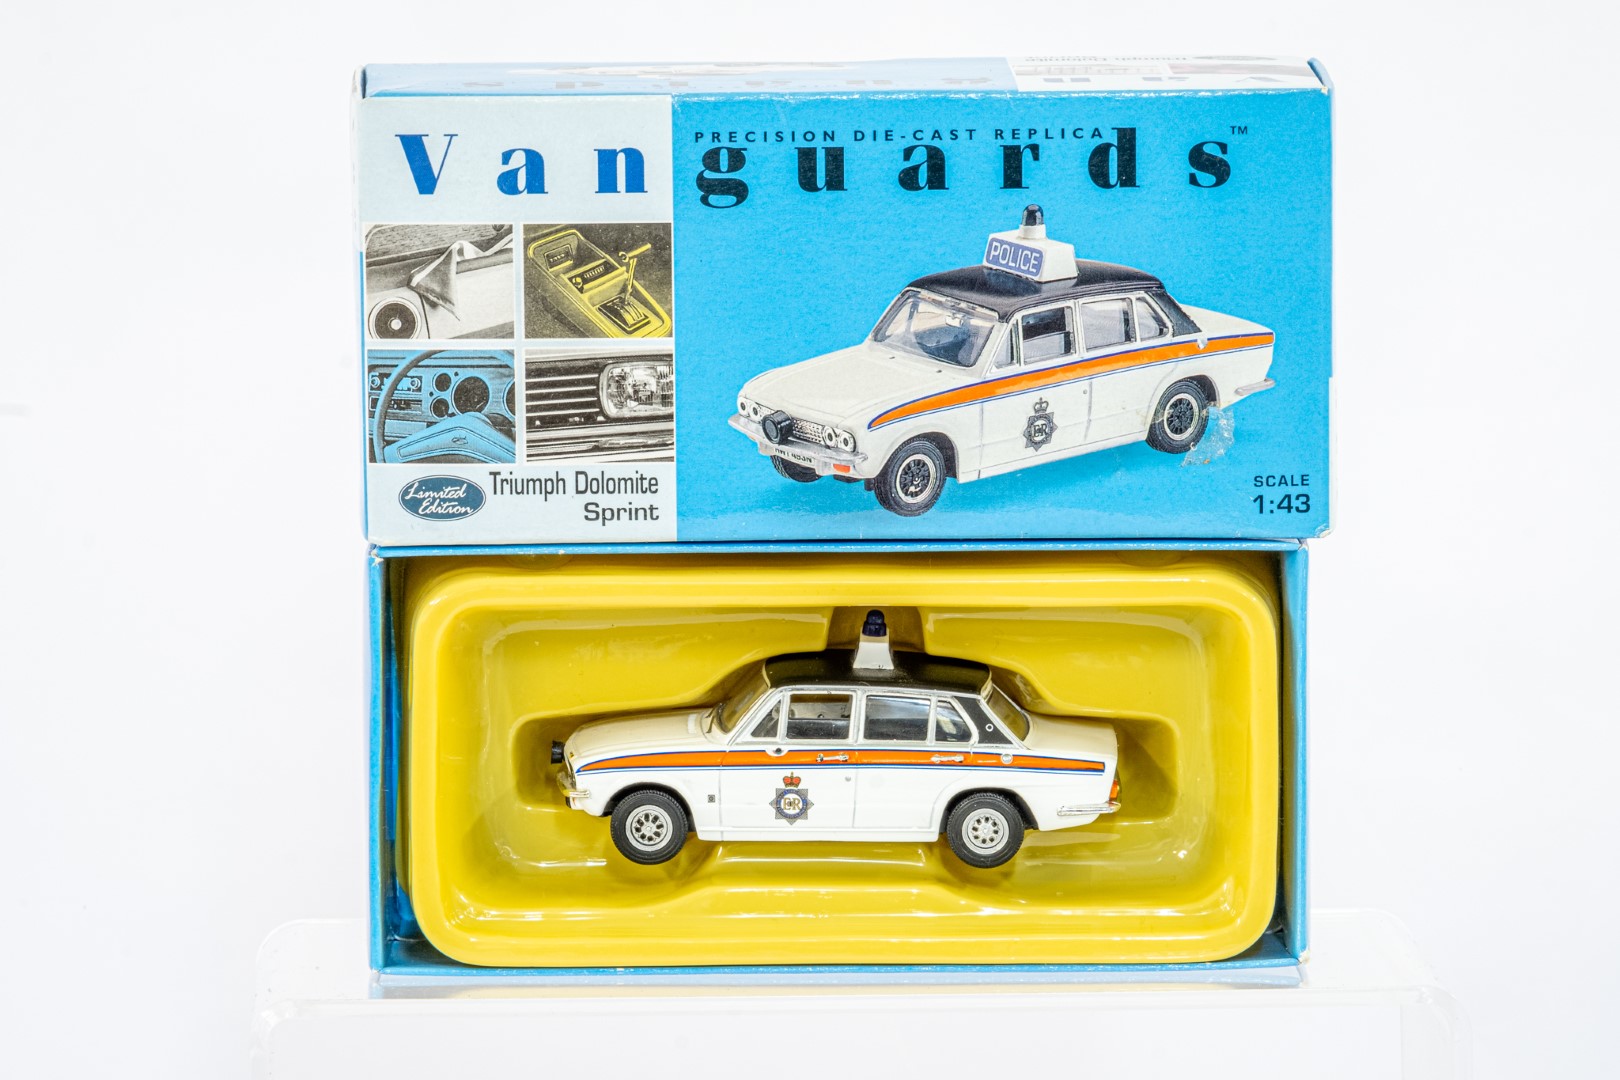 Vanguards 3 Boxed Police Models - Image 3 of 4